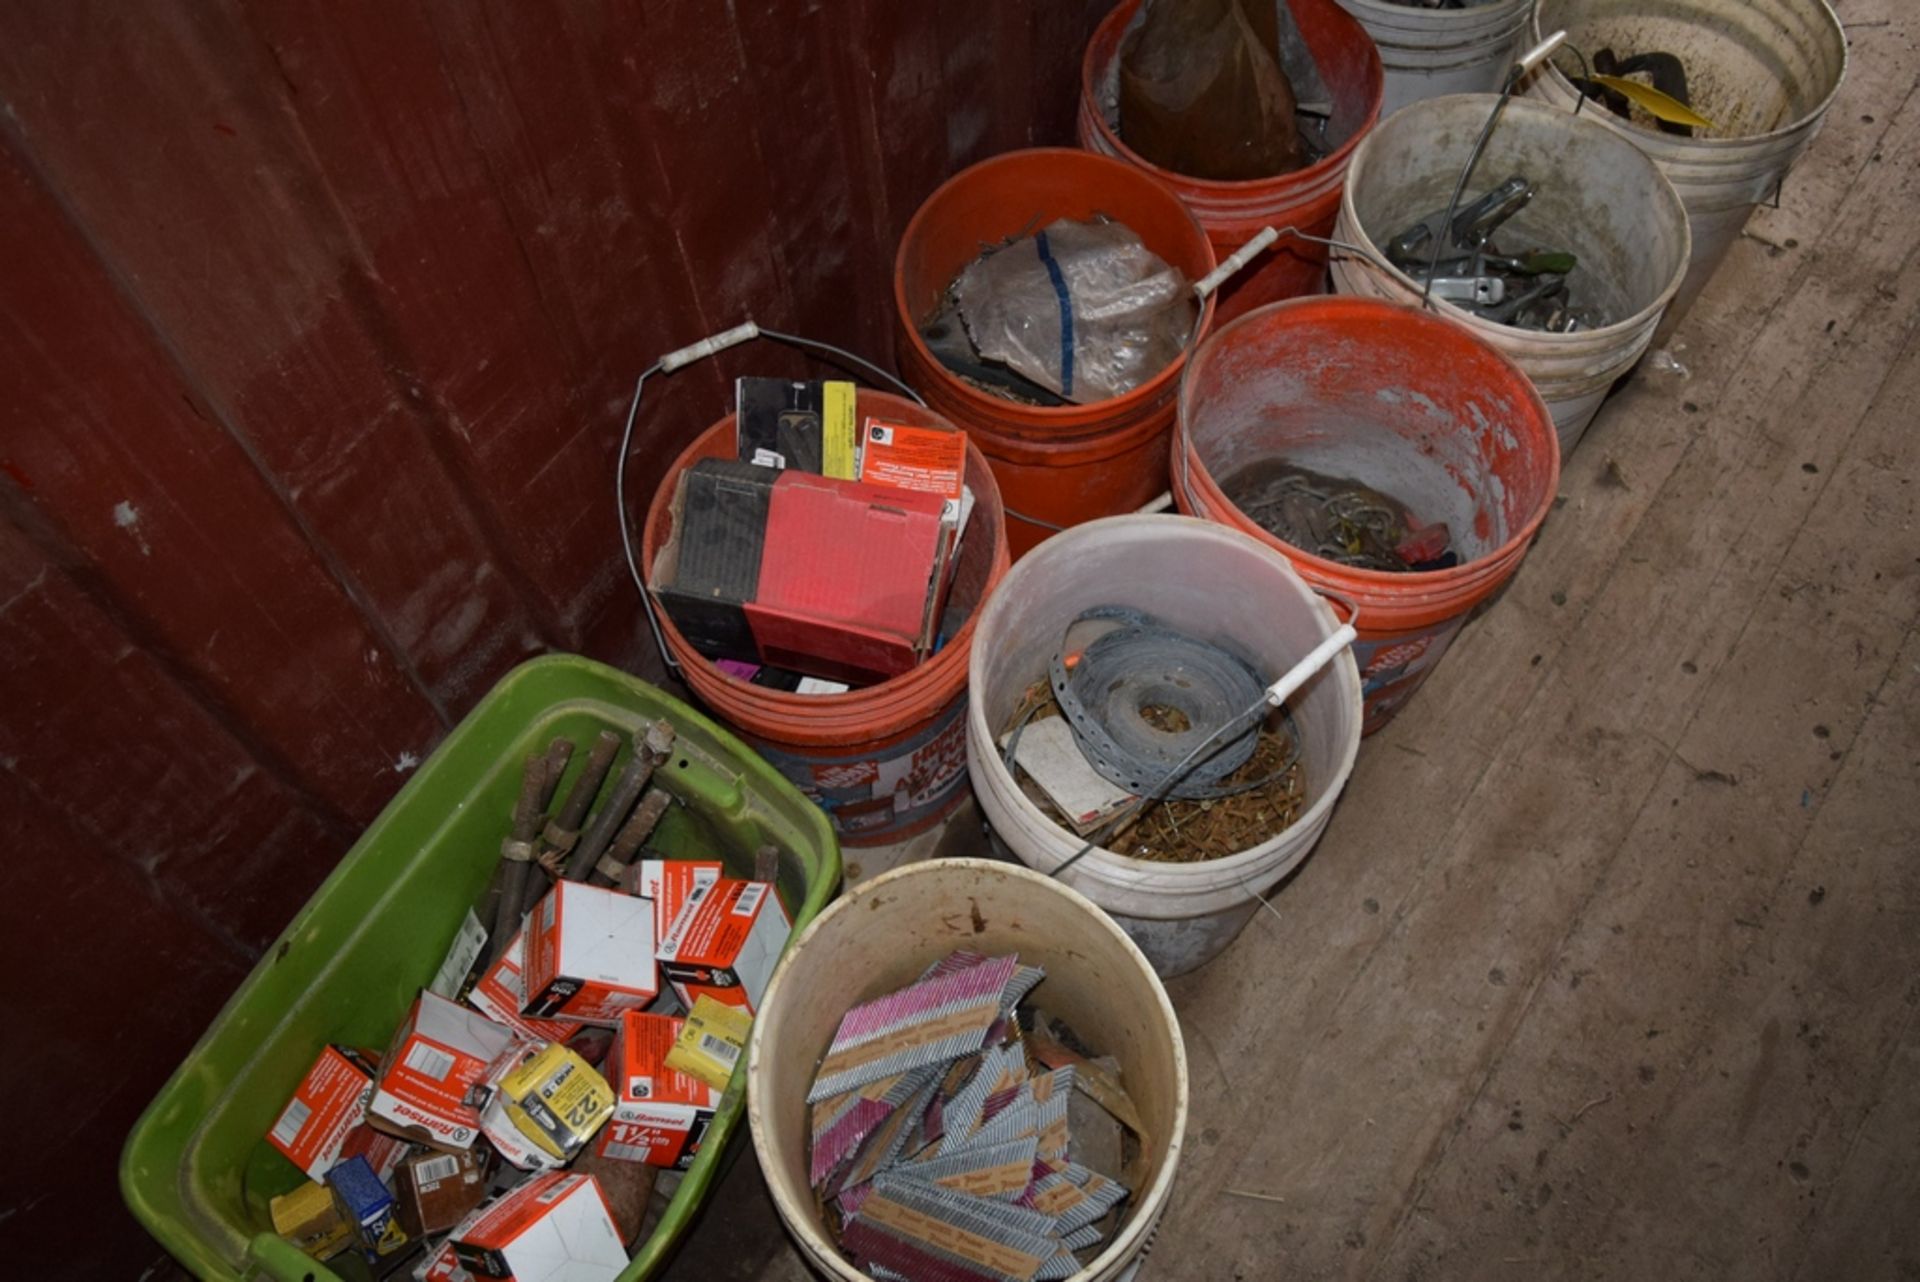 ASSORTED EYE BOLTS, CABLE NUTS, CHAINS, NAILS IN 10 BUCKETS - Image 2 of 2